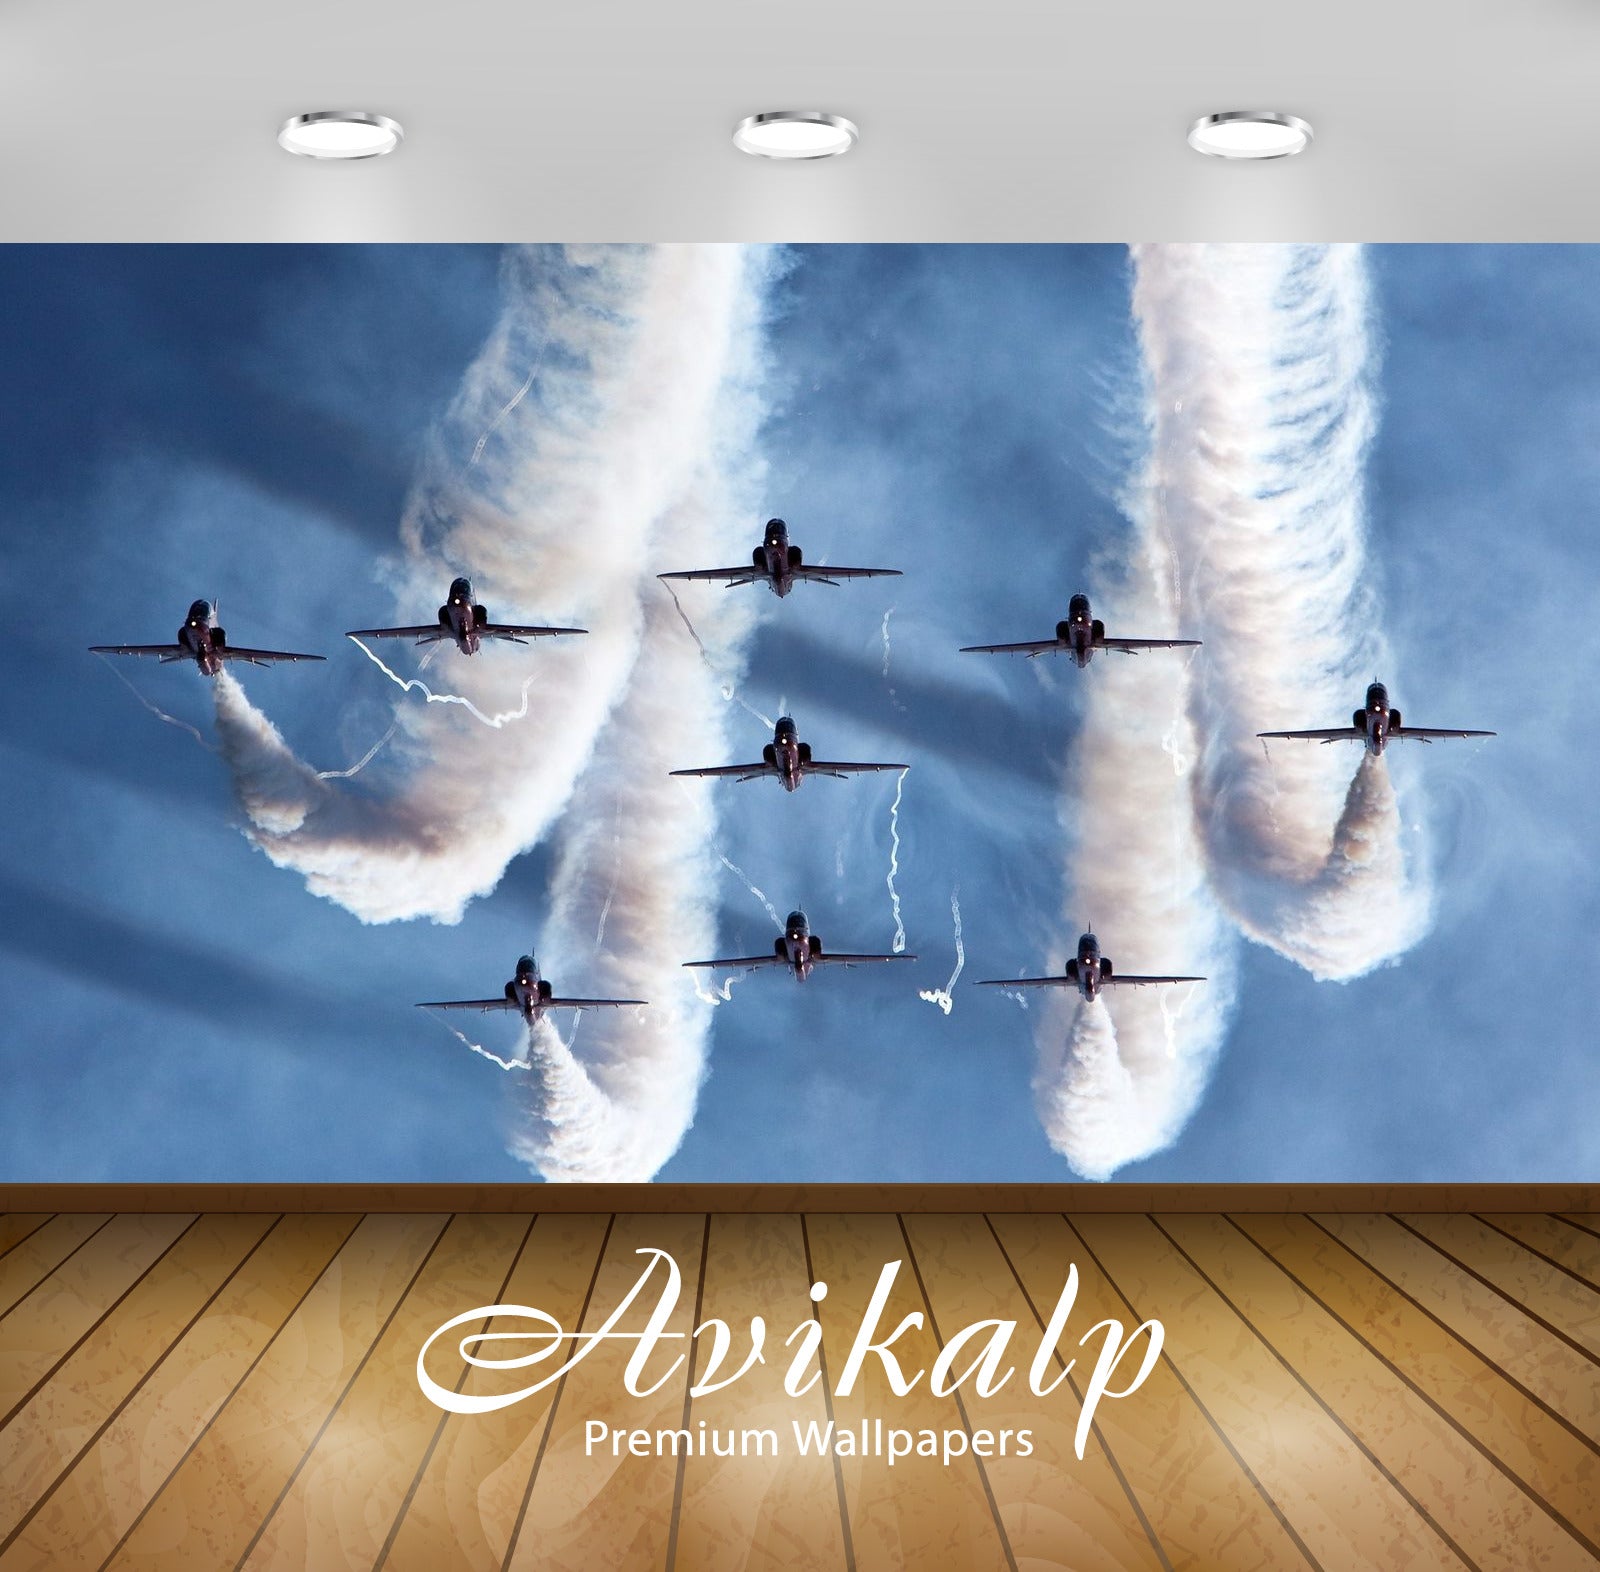 Avikalp Exclusive Awi2018 Aerobatic Team Air Force  Full HD Wallpapers for Living room, Hall, Kids R